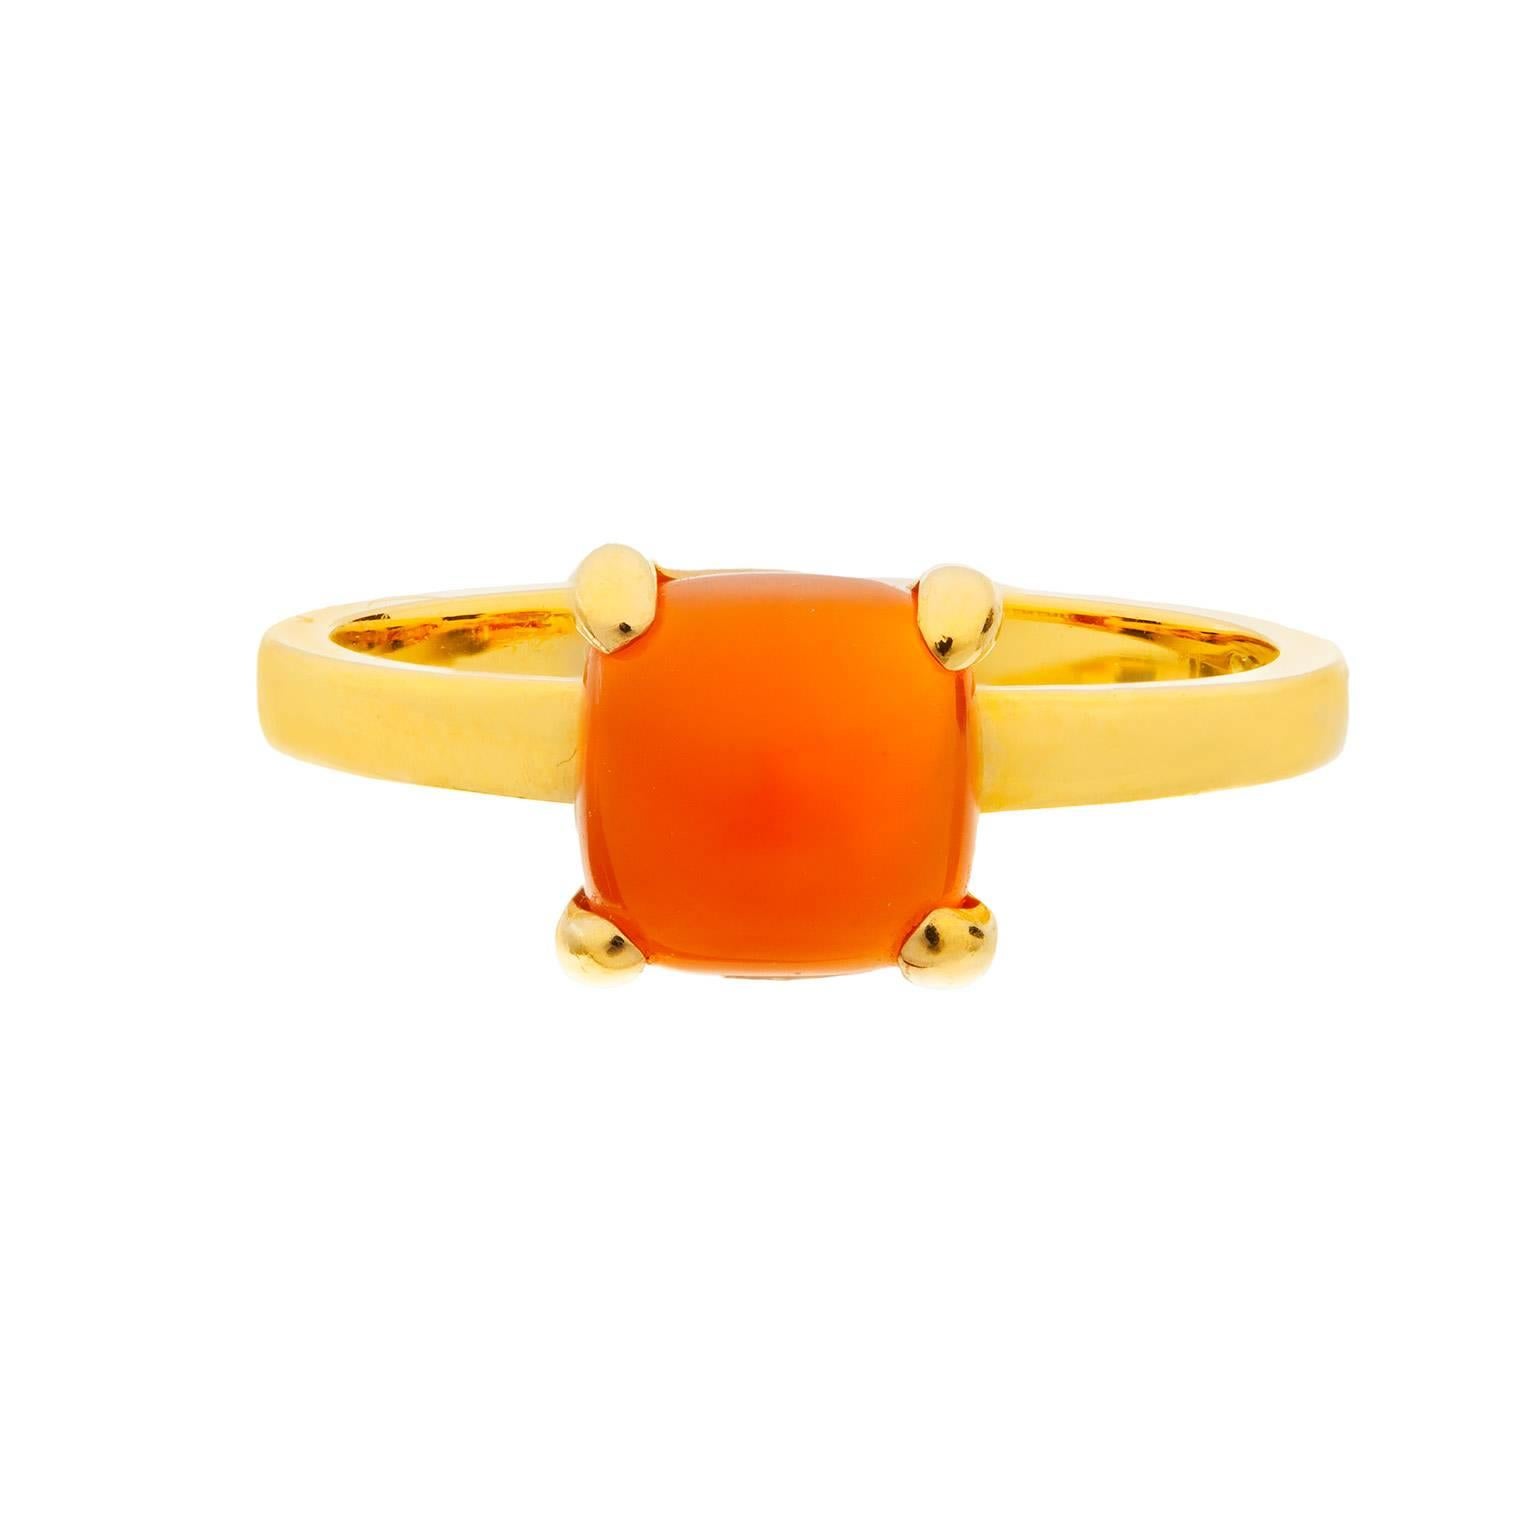 Luscious colors, designed to be stacked or worn alone. Tiffany & Co. ring with an orange chalcedony in 18k yellow gold.  The chalcedony is a loaf cut, weighing an estimated 1.70cts.. Original designs copyrighted by Paloma Picasso.

Signed: 